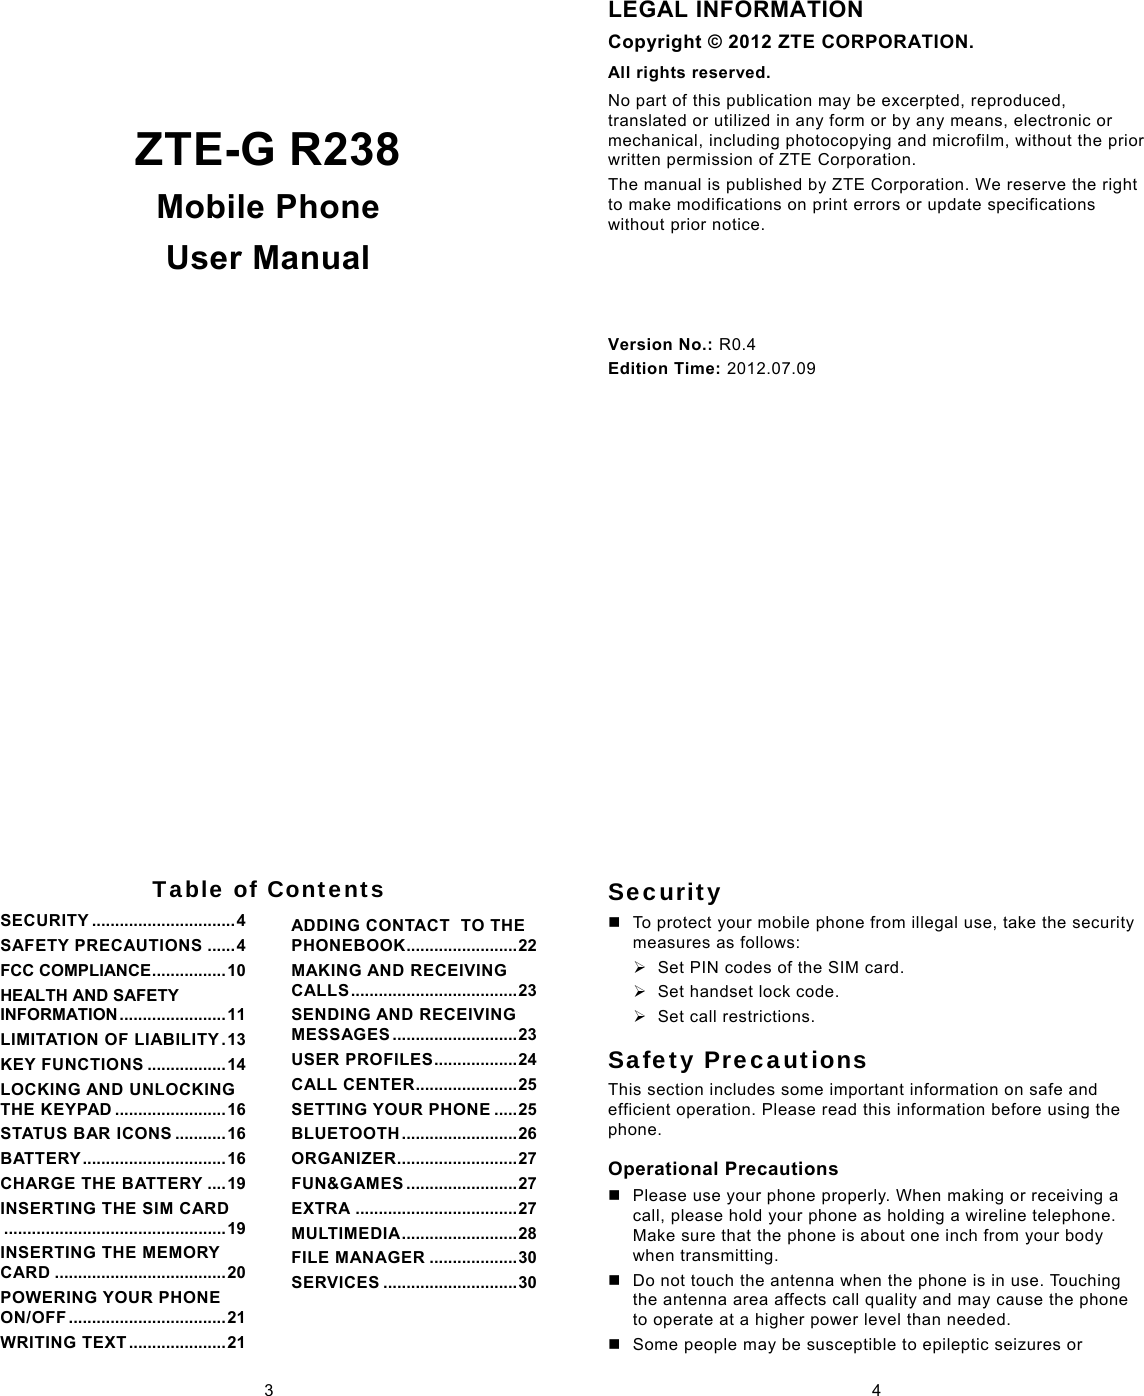   ZTE-G R238  Mobile Phone User Manual   LEGAL INFORMATION Copyright © 2012 ZTE CORPORATION. All rights reserved. No part of this publication may be excerpted, reproduced, translated or utilized in any form or by any means, electronic or mechanical, including photocopying and microfilm, without the prior written permission of ZTE Corporation. The manual is published by ZTE Corporation. We reserve the right to make modifications on print errors or update specifications without prior notice. Version No.: R0.4 Edition Time: 2012.07.09 3 Table of ContentsSECURITY ............................... 4SAFETY PRECAUTIONS ...... 4FCC COMPLIANCE ................ 10HEALTH AND SAFETY INFORMATION ....................... 11LIMITATION OF LIABILITY . 13KEY FUNCTIONS ................. 14LOCKING AND UNLOCKING THE KEYPAD ........................ 16STATUS BAR ICONS ........... 16B AT TE RY  ............................... 16CHARGE THE BATTERY .... 19INSERTING THE SIM CARD ................................................ 19INSERTING THE MEMORY CARD ..................................... 20POWERING YOUR PHONE ON/OFF  .................................. 21WRITING TEXT ..................... 21ADDING CONTACT  TO THE PHONEBOOK ........................ 22MAKING AND RECEIVING C AL L S  .................................... 23SENDING AND RECEIVING MESSAGES ........................... 23USER PROFILES .................. 24CALL CENTER ...................... 25SETTING YOUR PHONE ..... 25BLU ETOO TH  ......................... 26ORGANIZER .......................... 27FUN&amp;GAMES ........................ 27EXTRA ................................... 27M ULTI M E D I A  ......................... 28FILE MANAGER ................... 30SERVICES ............................. 30 4 Security   To protect your mobile phone from illegal use, take the security measures as follows: ¾  Set PIN codes of the SIM card. ¾  Set handset lock code. ¾  Set call restrictions. Safety Precautions This section includes some important information on safe and efficient operation. Please read this information before using the phone. Operational Precautions   Please use your phone properly. When making or receiving a call, please hold your phone as holding a wireline telephone. Make sure that the phone is about one inch from your body when transmitting.   Do not touch the antenna when the phone is in use. Touching the antenna area affects call quality and may cause the phone to operate at a higher power level than needed.   Some people may be susceptible to epileptic seizures or 